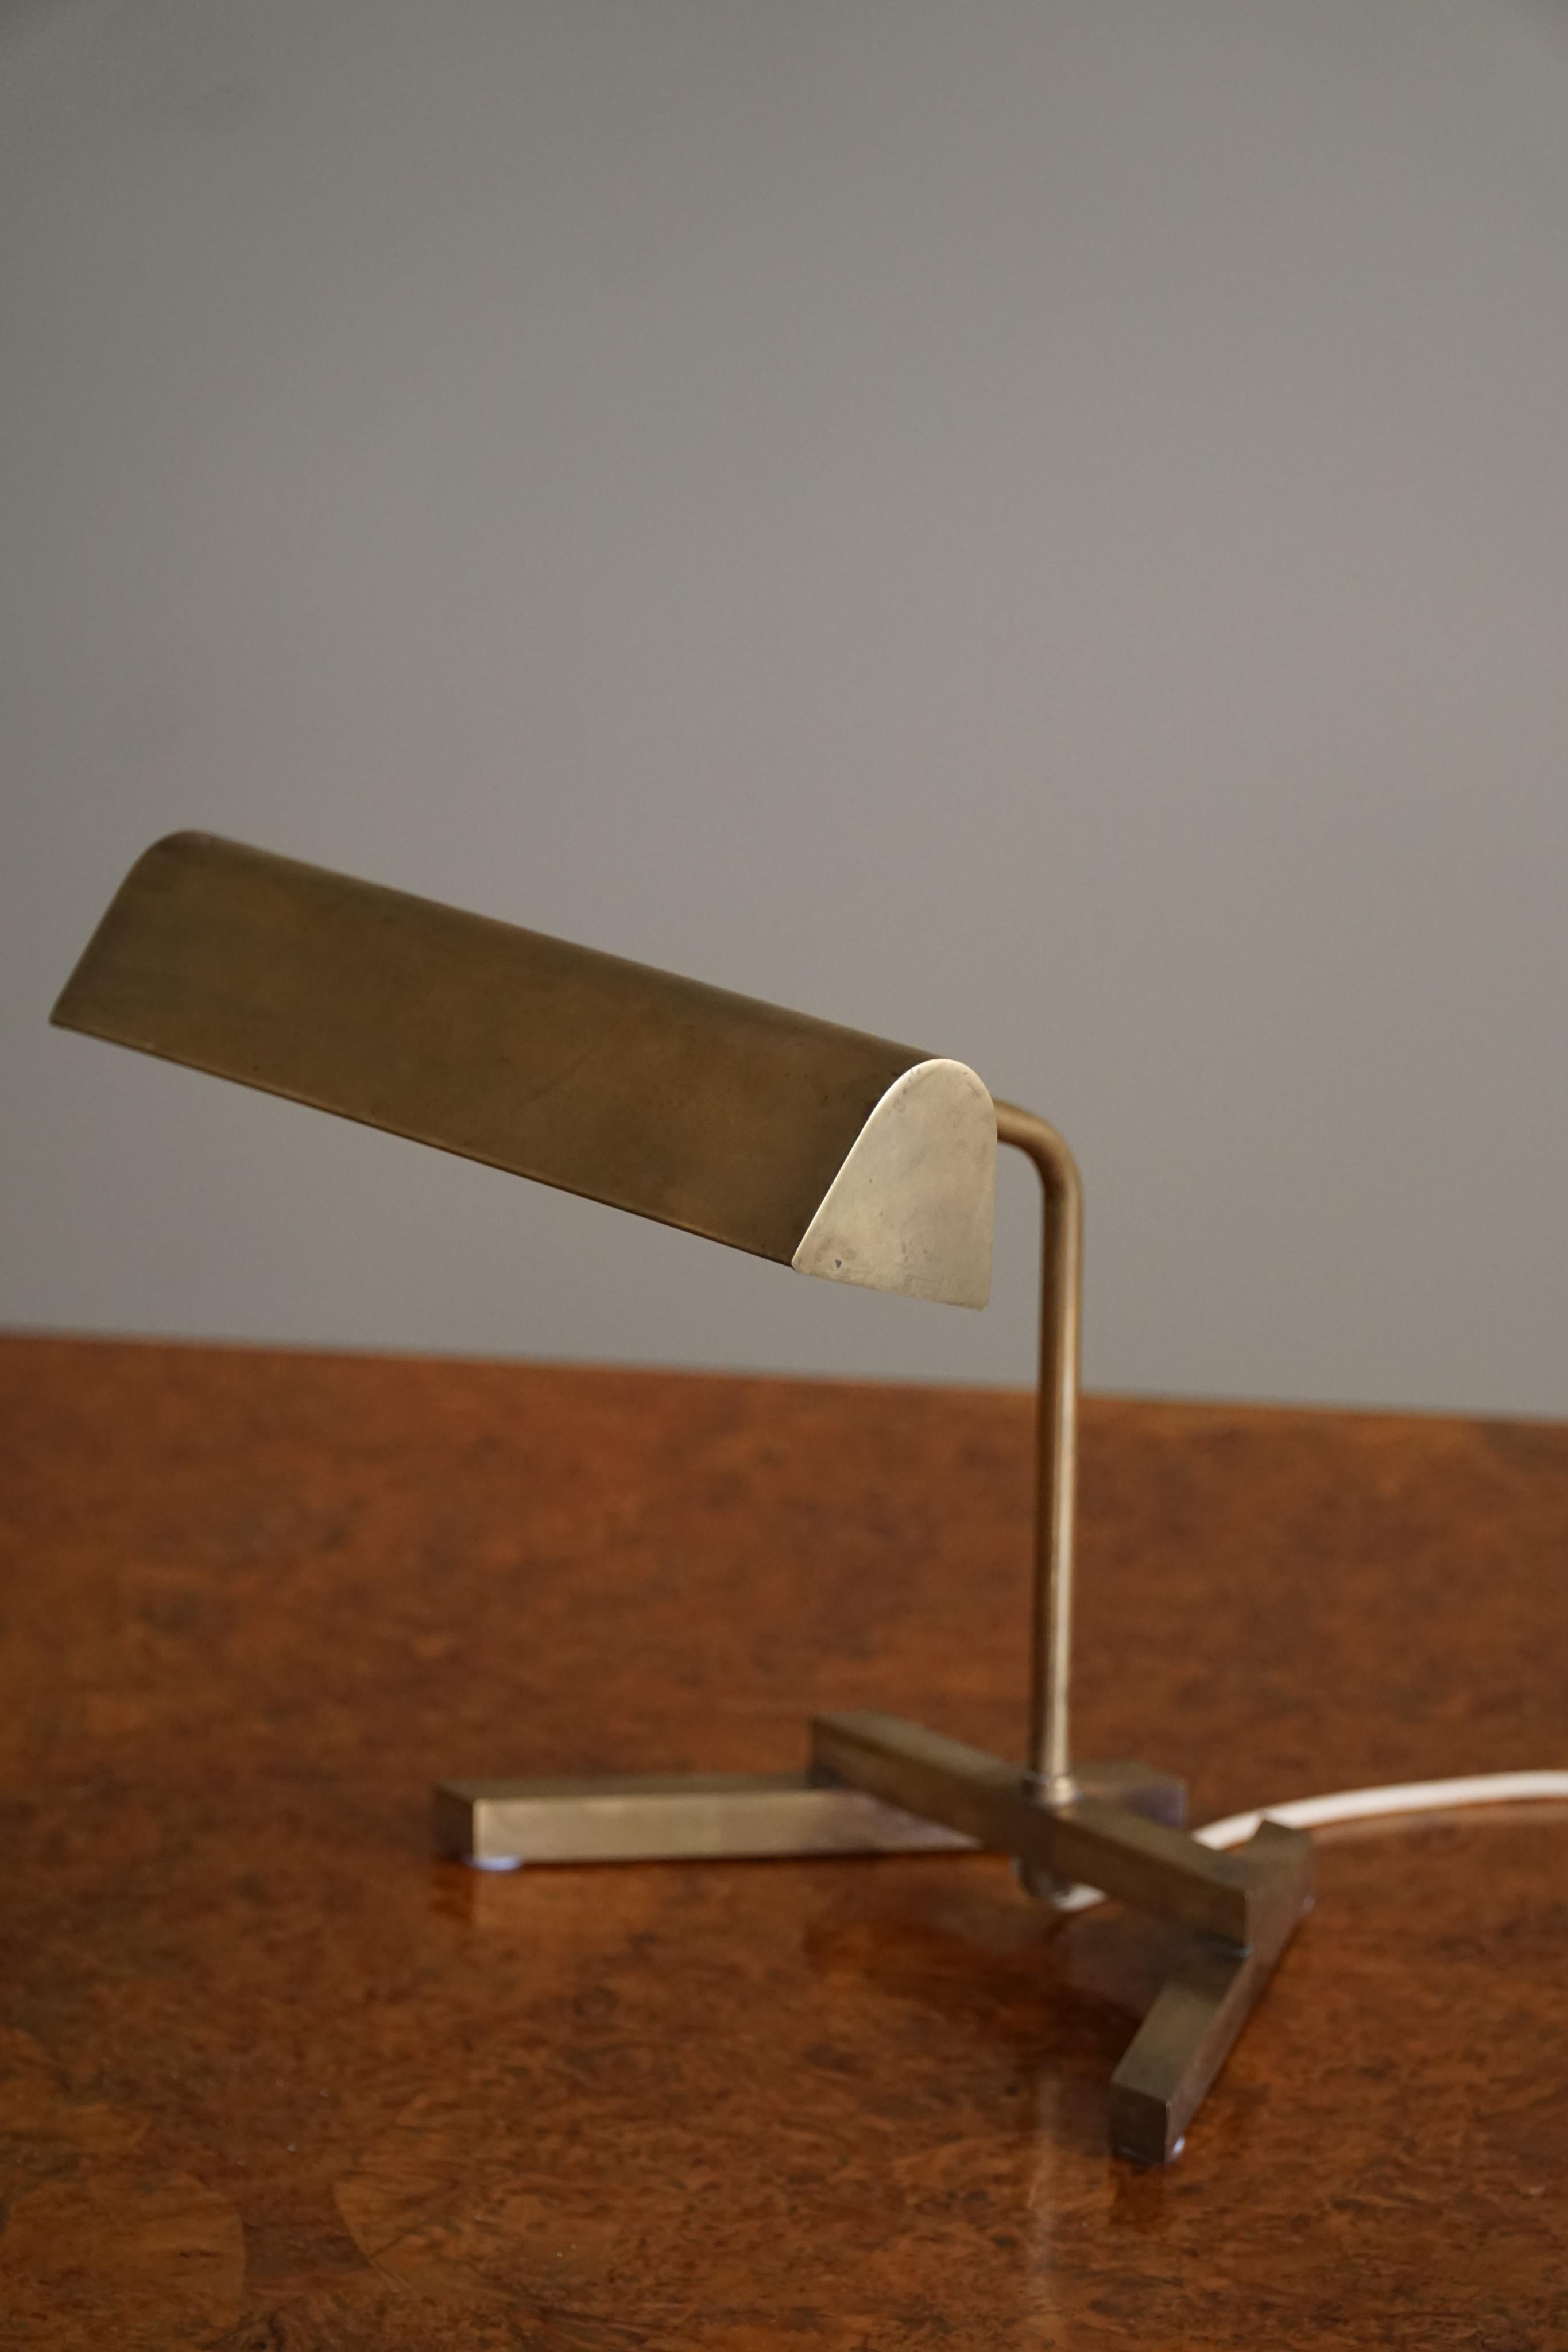 Danish Mid Century Modern, Geometric Table Lamp in Brass from the 1950s For Sale 6